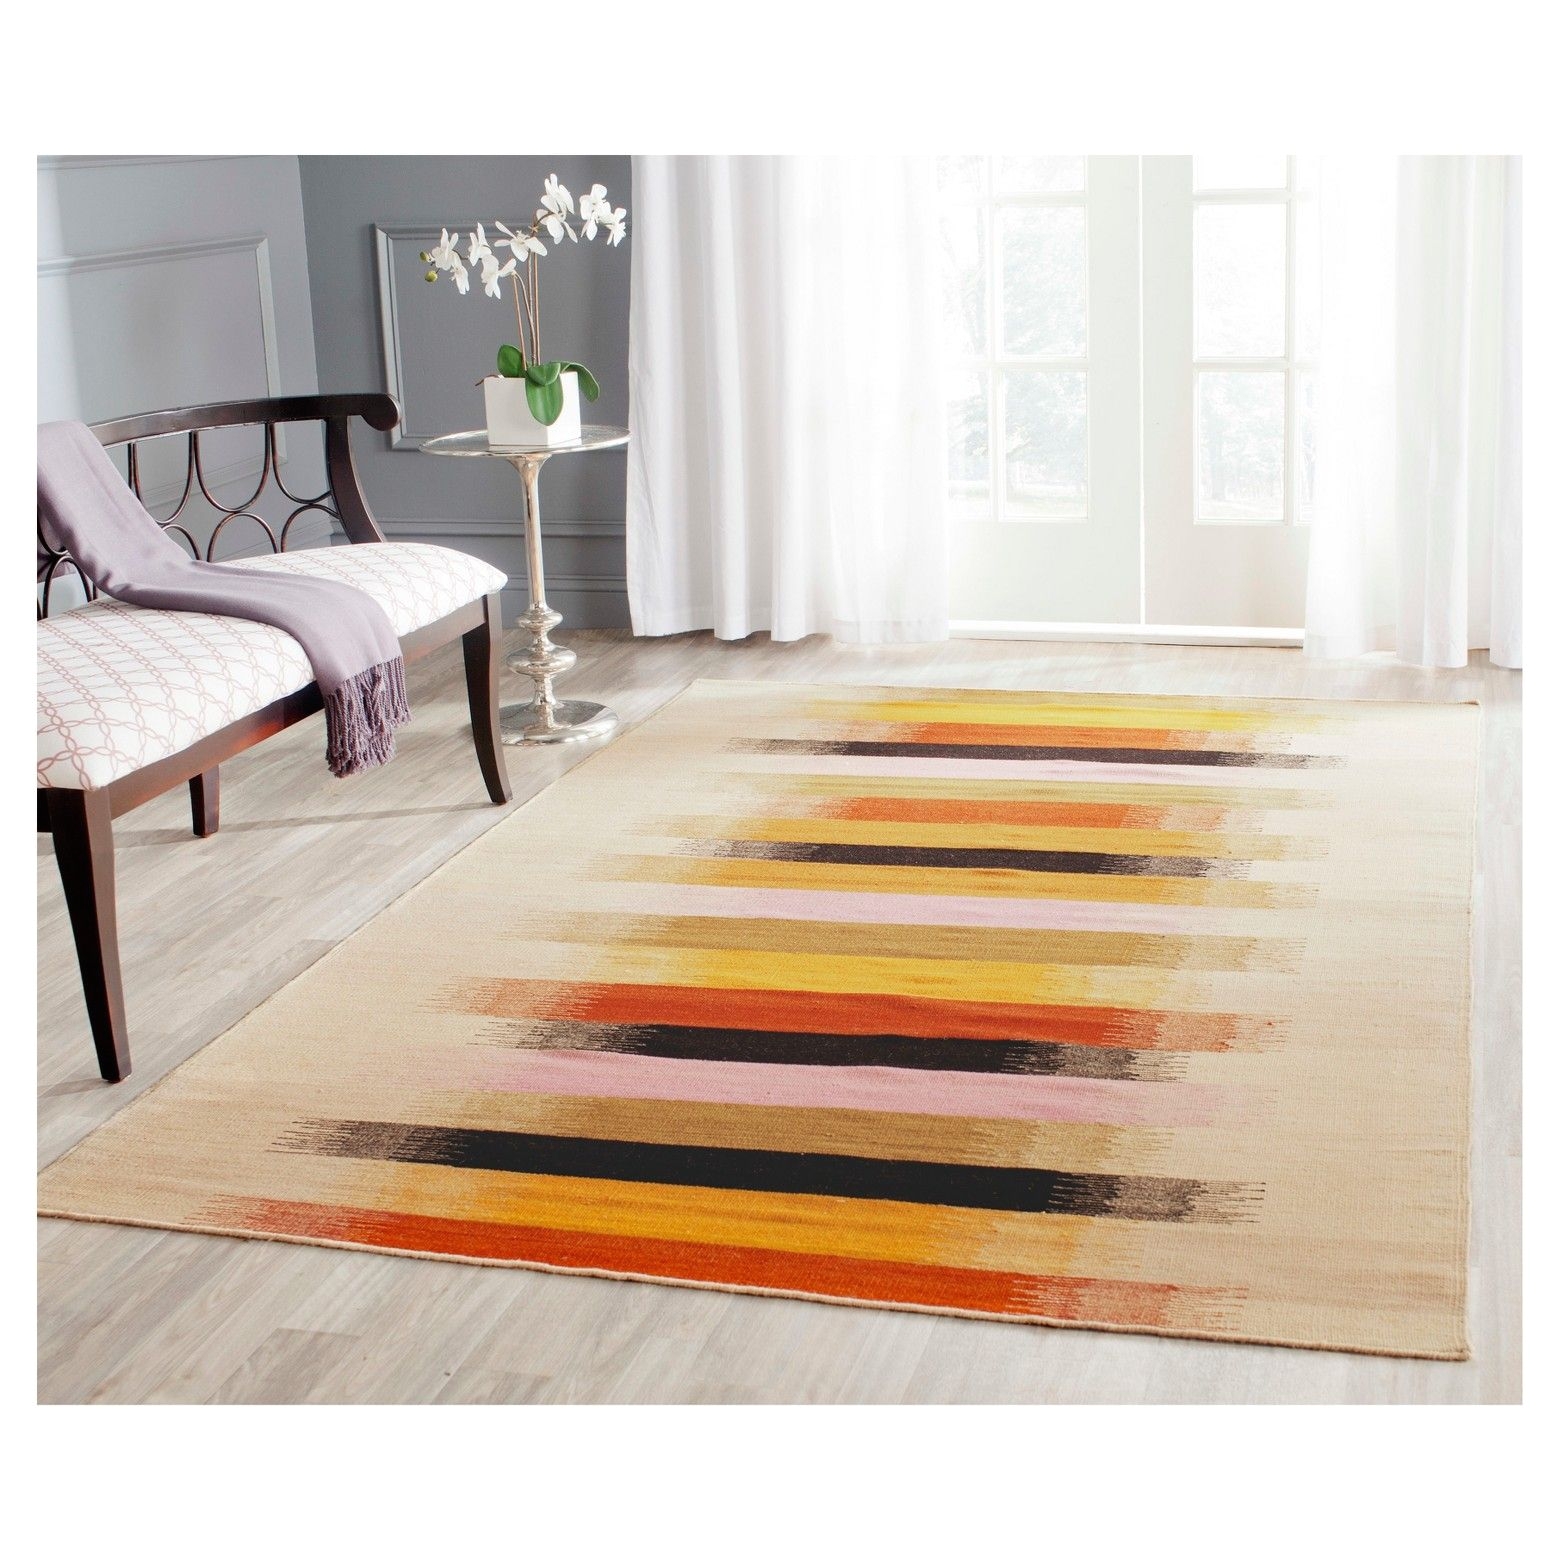 transform your room s look with a safavieh laila dhurrie rug boasting vibrant streaks of color this striking accent rug makes an excellent centerpiece in